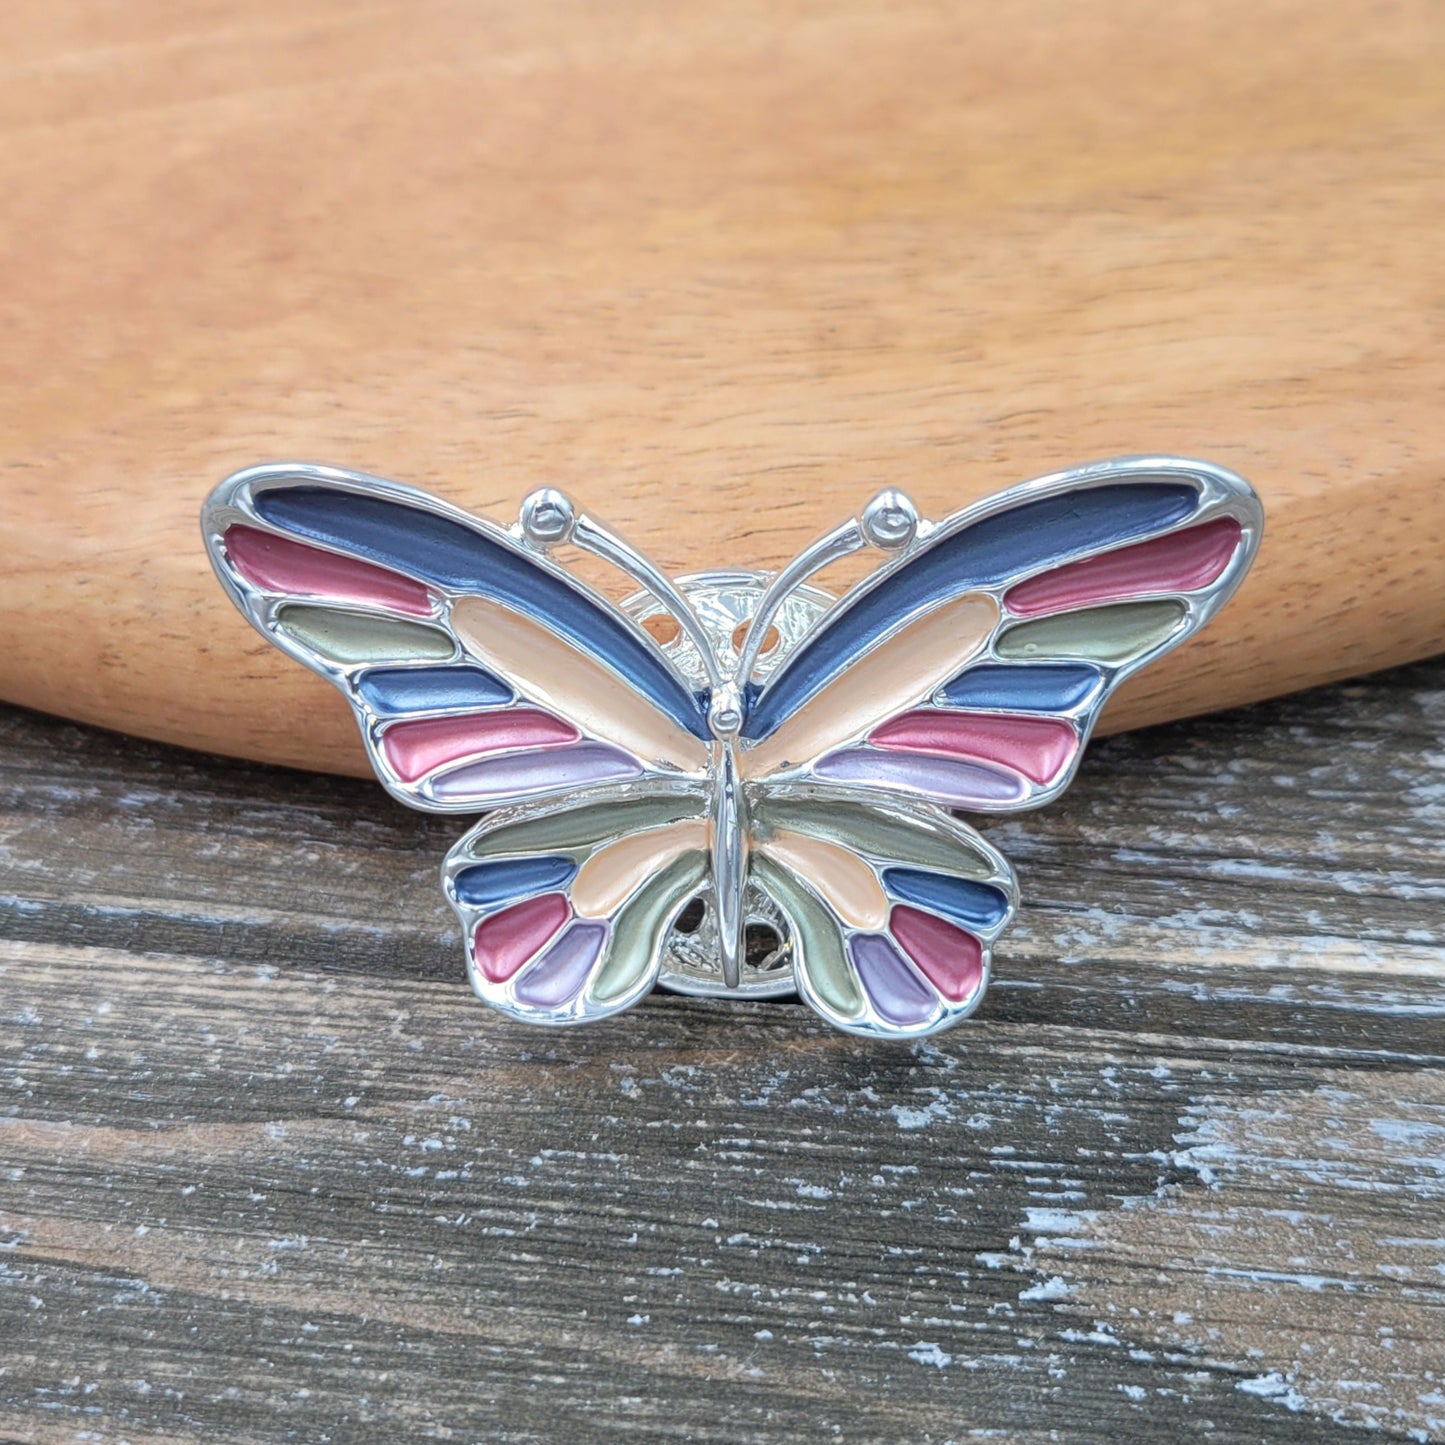 BESHEEK Silvertone Multi-color Butterfly Magnetic Professional Artisan Brooch Pin | Handmade Hypoallergenic Office, Suit, Networking Style Jewelry